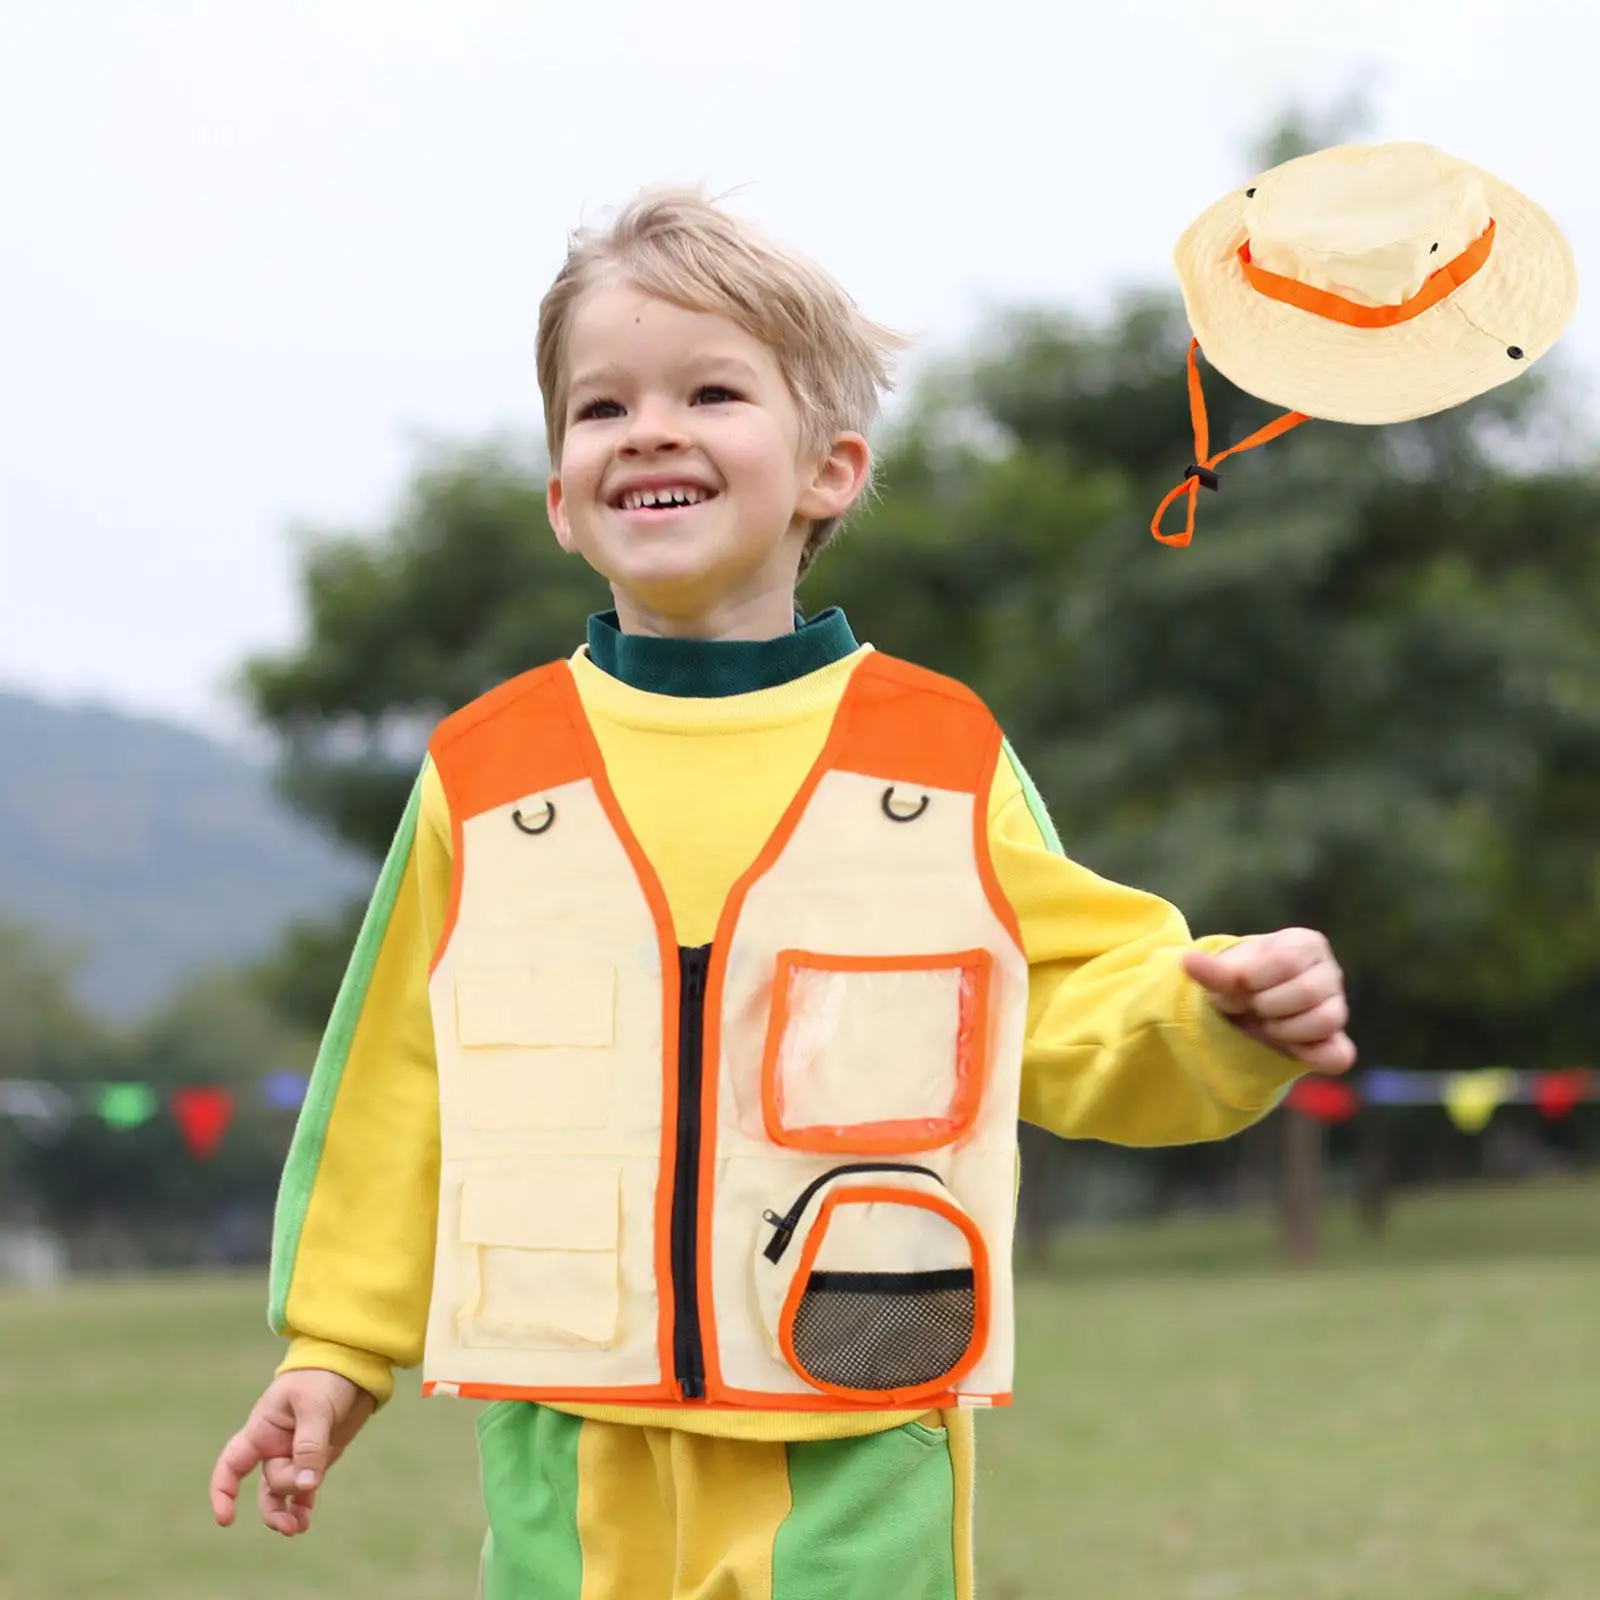 Kids Role Play Costumes Cosplay Costumes for Toddlers